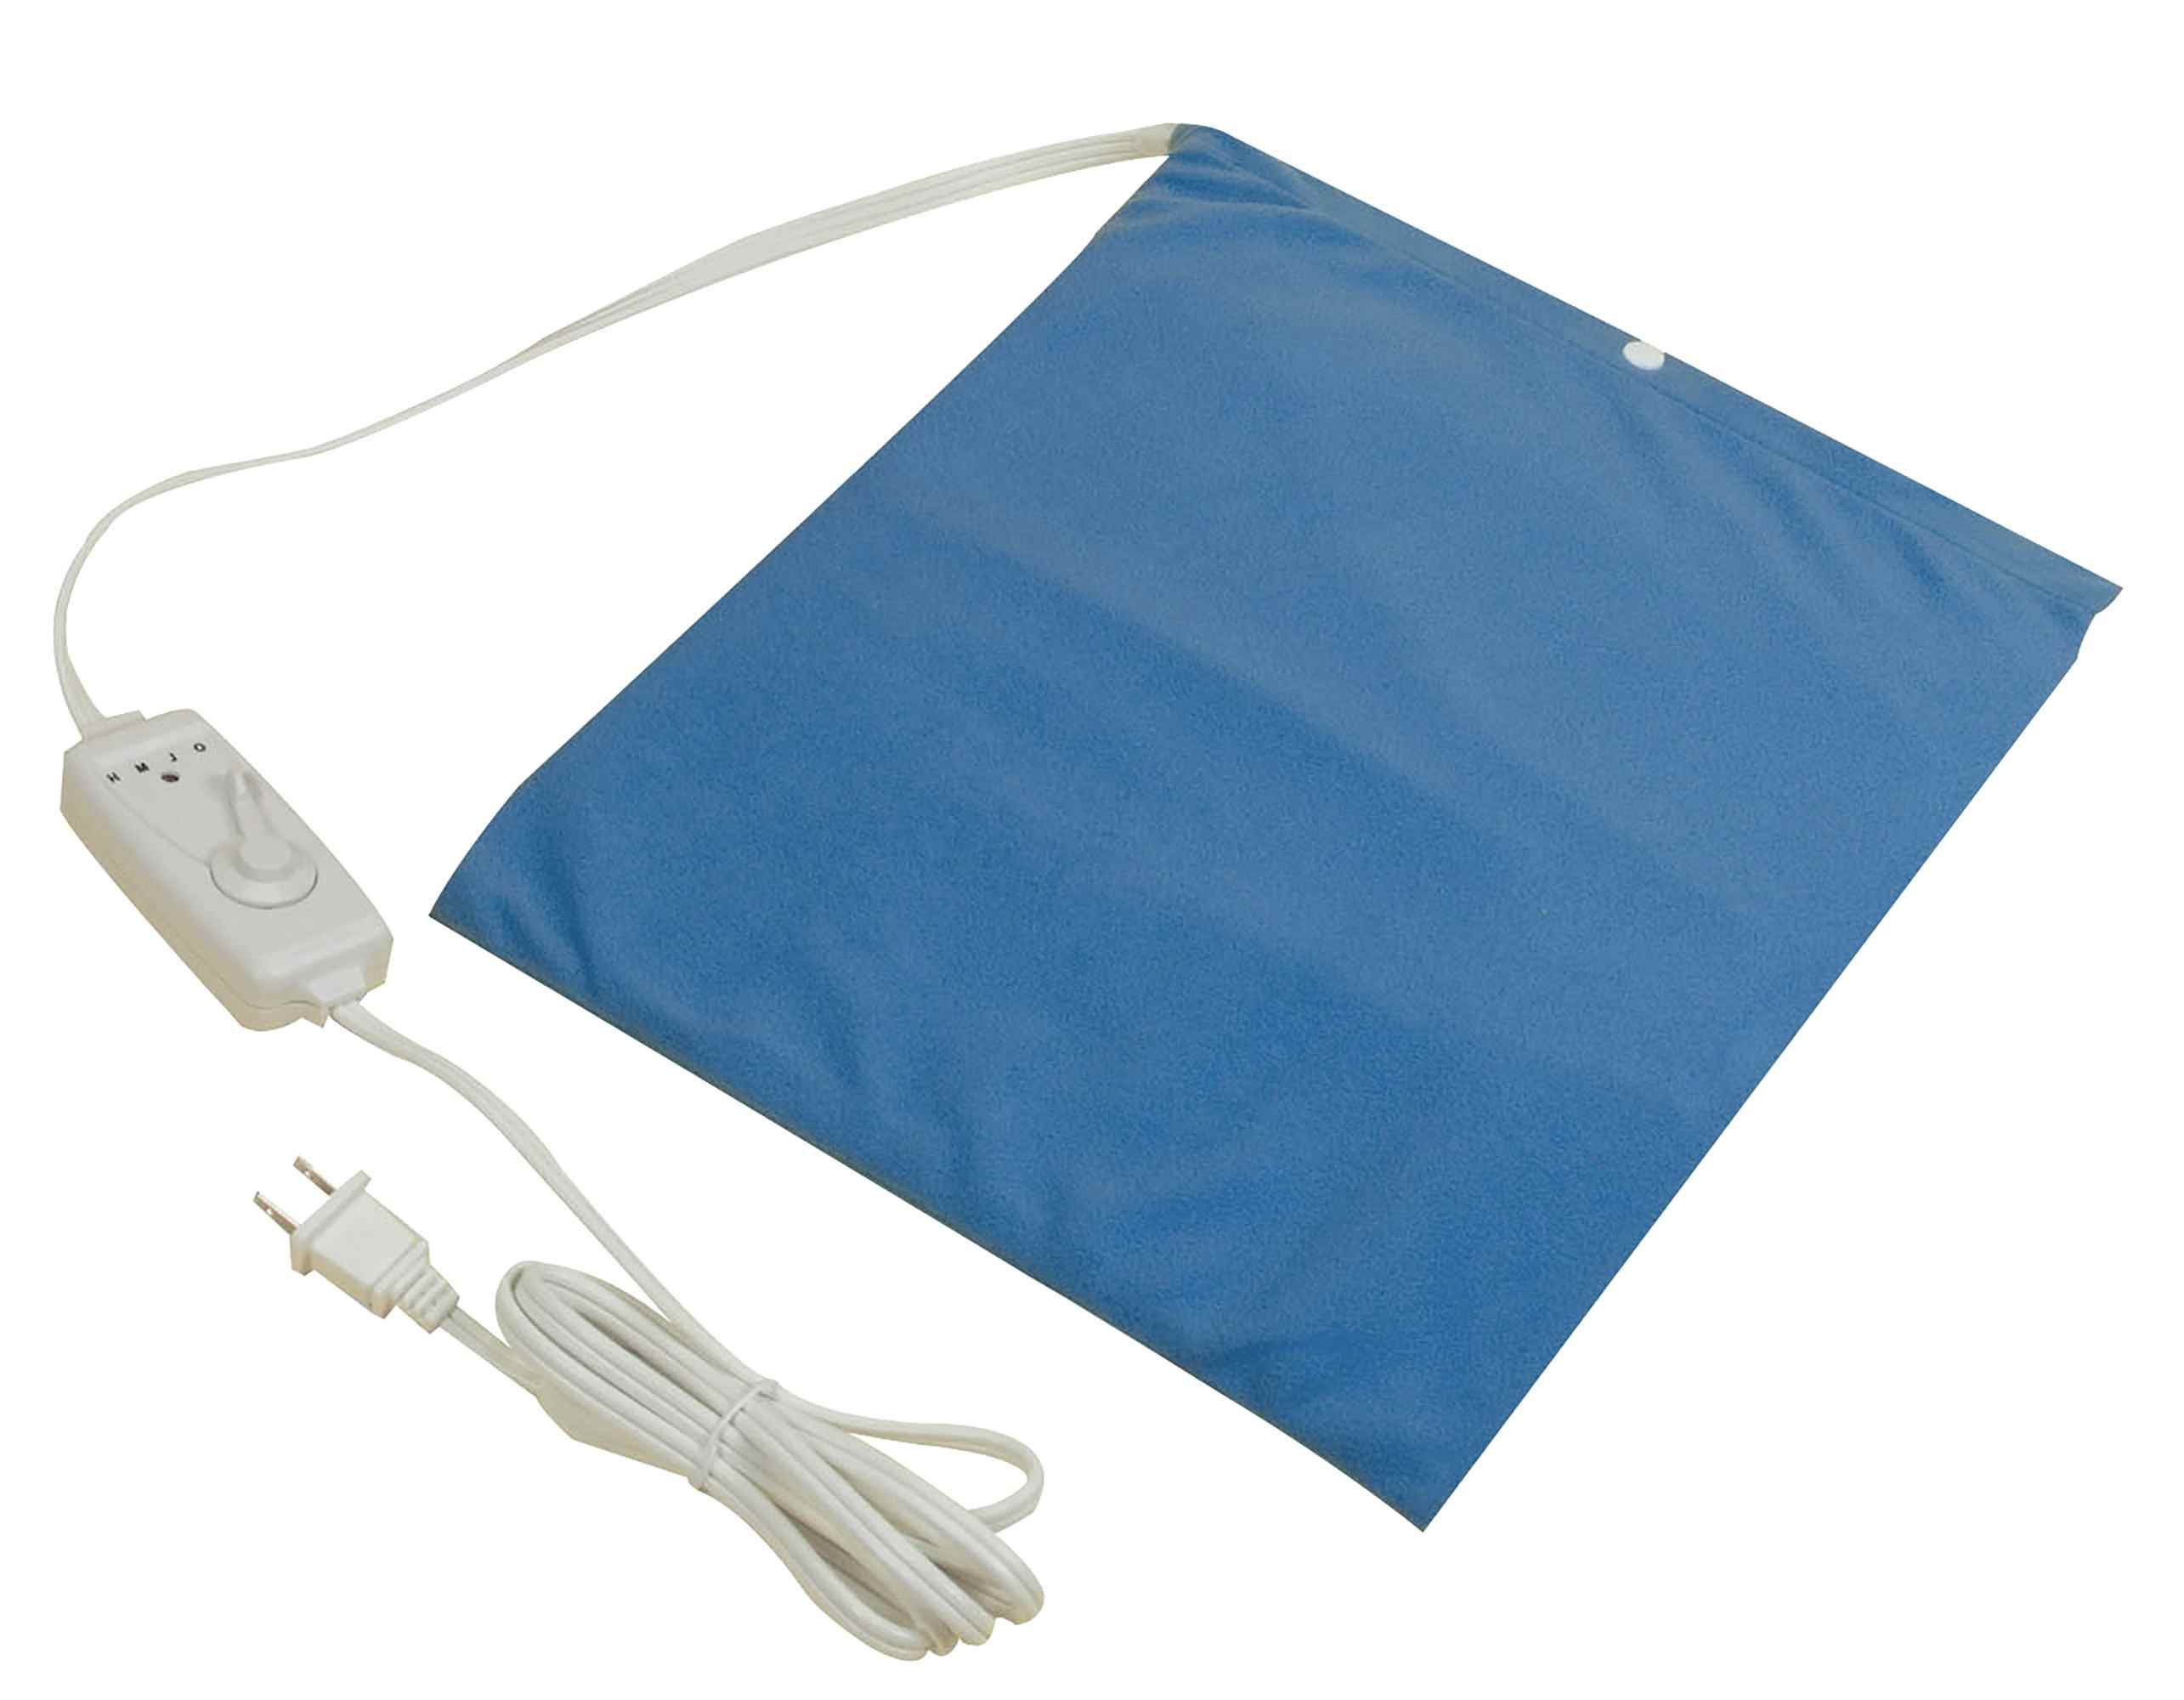 Economy Electric Heating Pad for Pain Relief, 11-1130-EA1, 1 Heating Pad